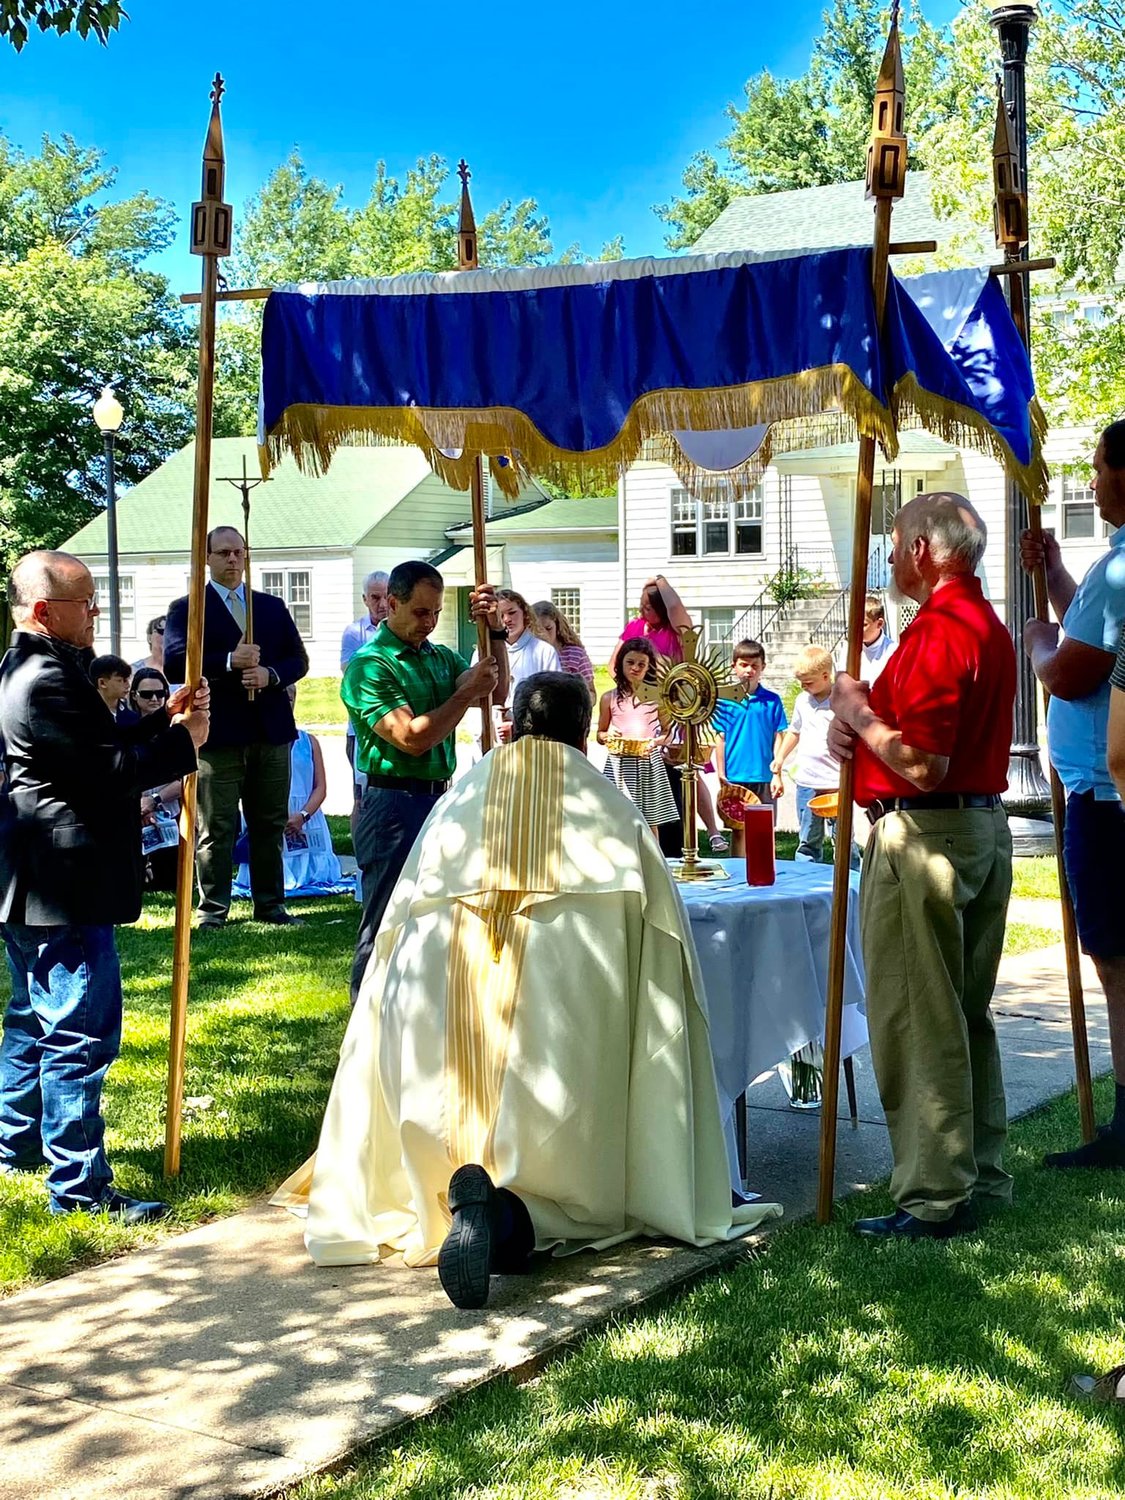 Father Gregory Oligschlaeger, pastor of Holy Rosary Parish in Monroe City and St. Stephen Parish in Indian Creek, reverences the Most Blessed Sacrament on one of three temporary altars near Holy Rosary Church during an outdoor Eucharistic procession on June 19, the Solemnity of the Most Holy Body and Blood of Christ.